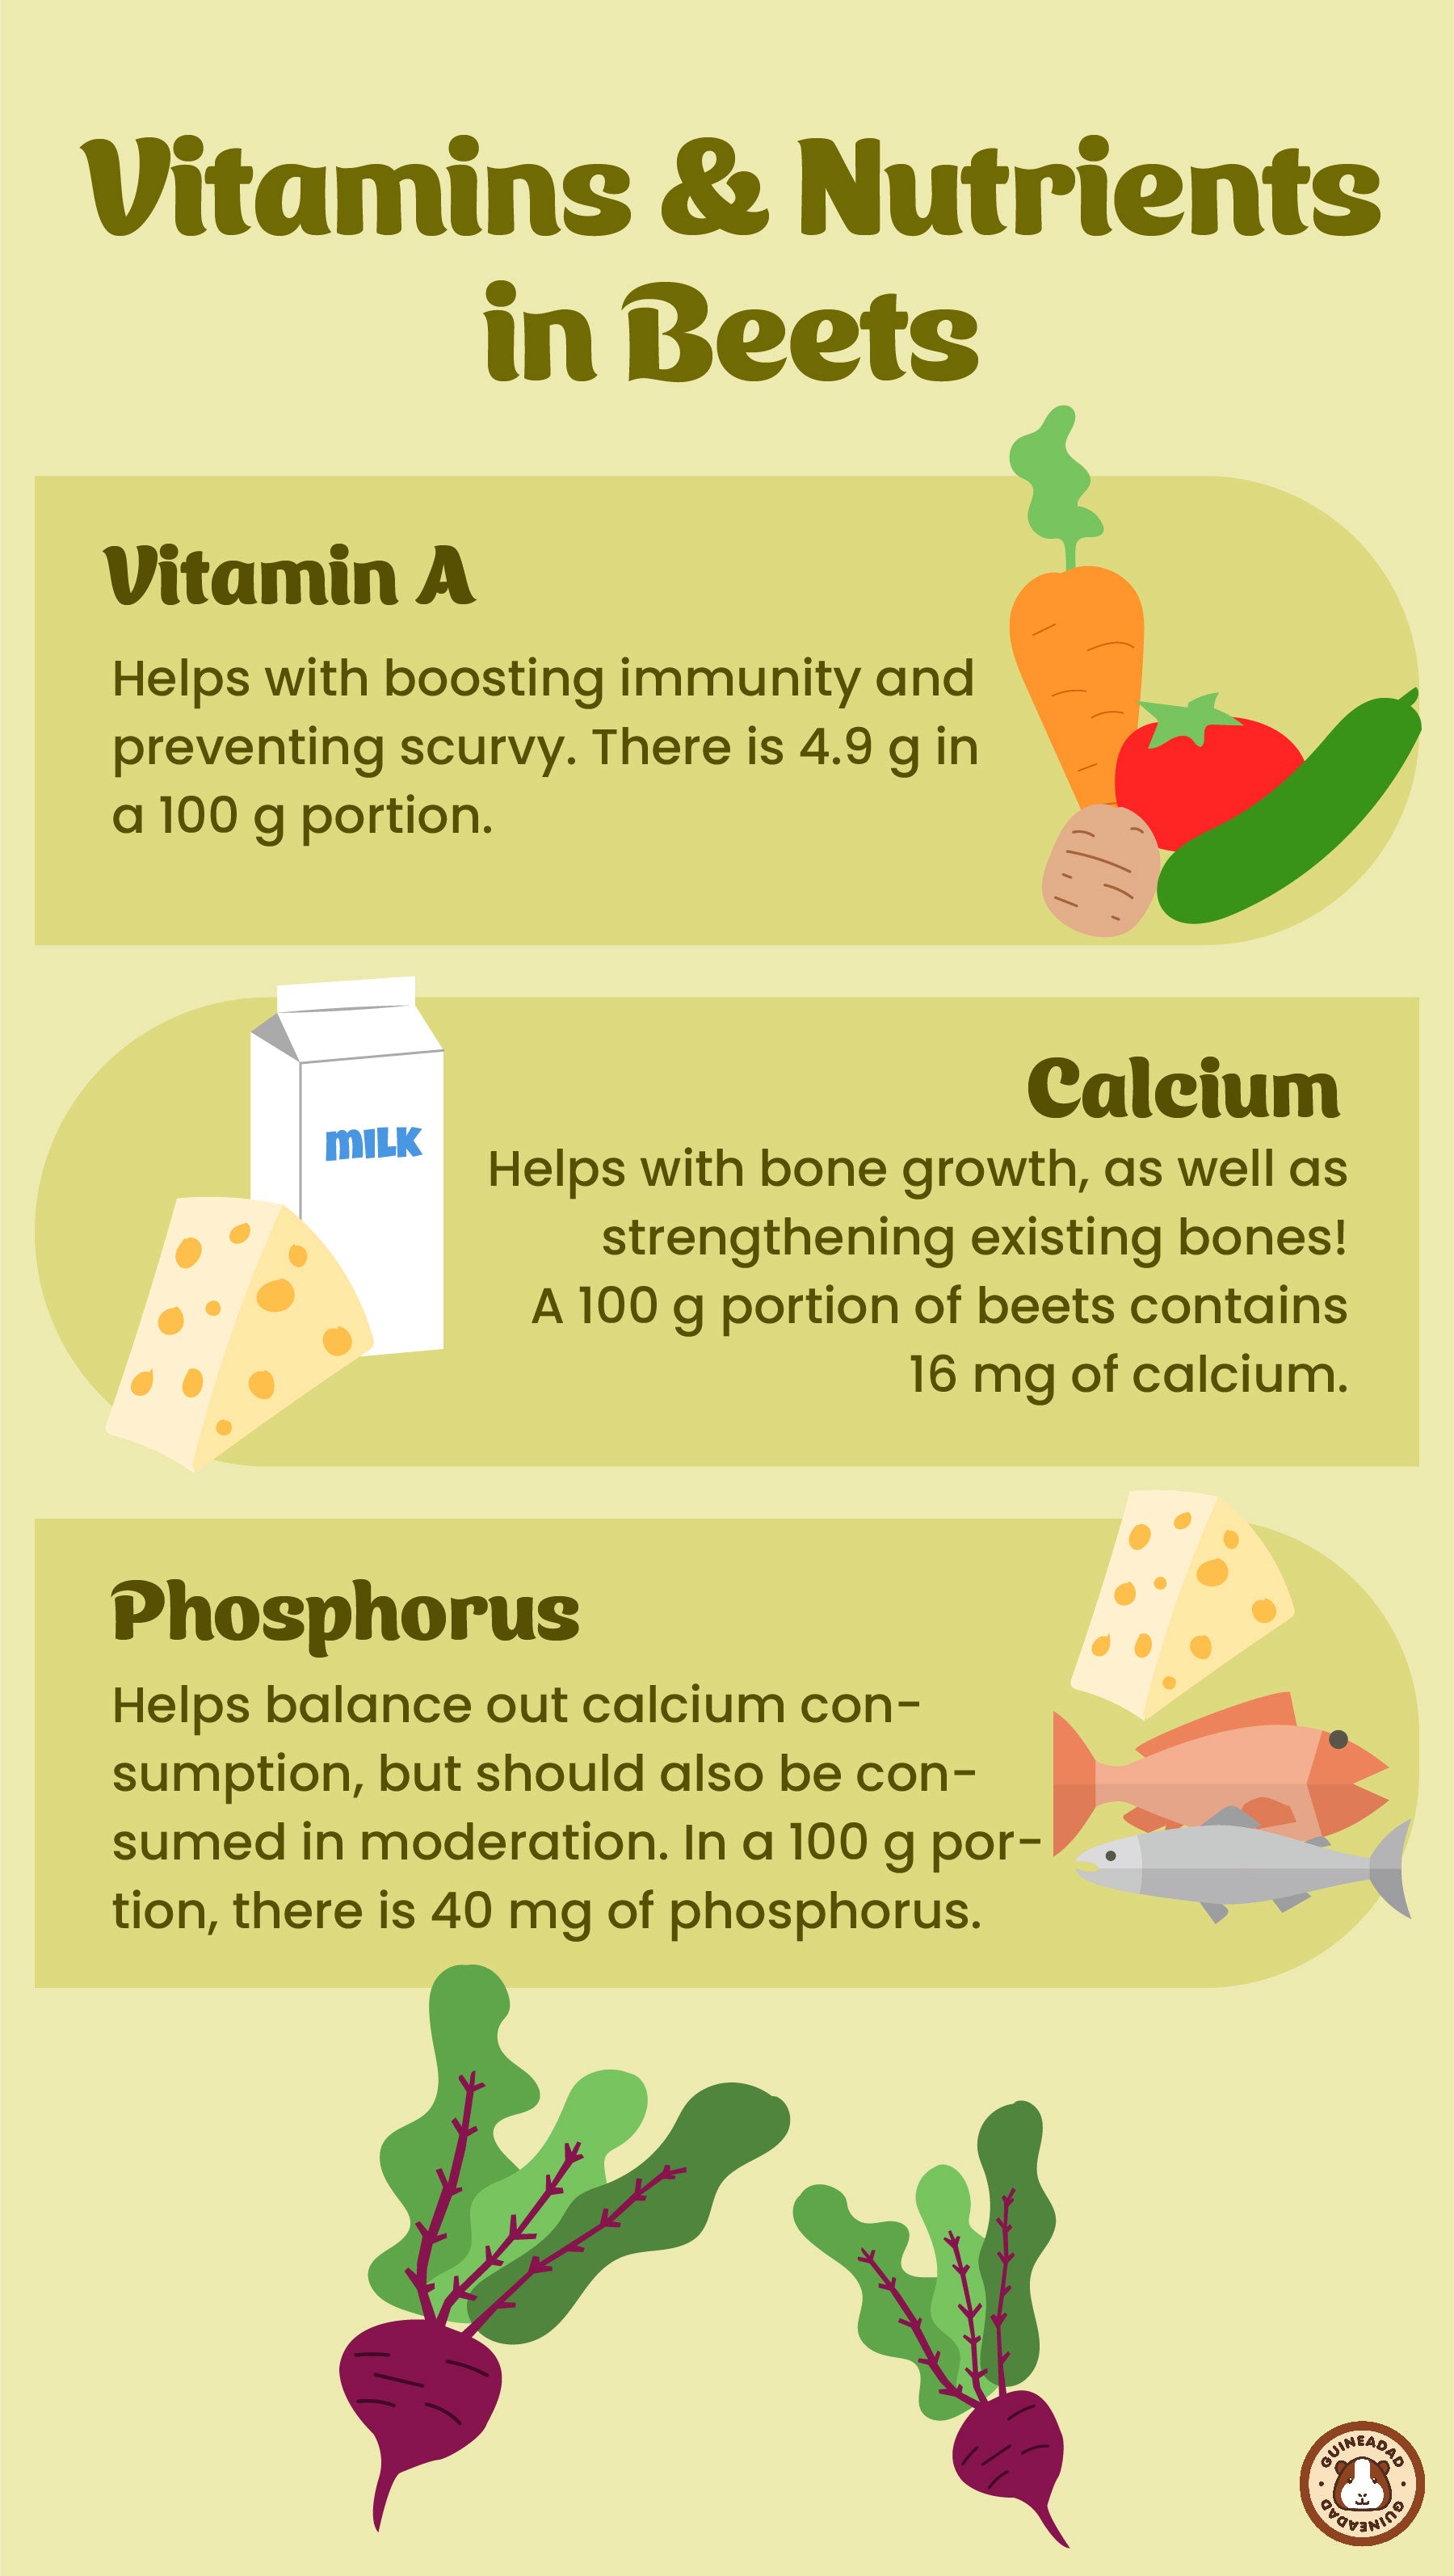 Infographic displaying the vitamins and nutrients in beets for guinea pigs